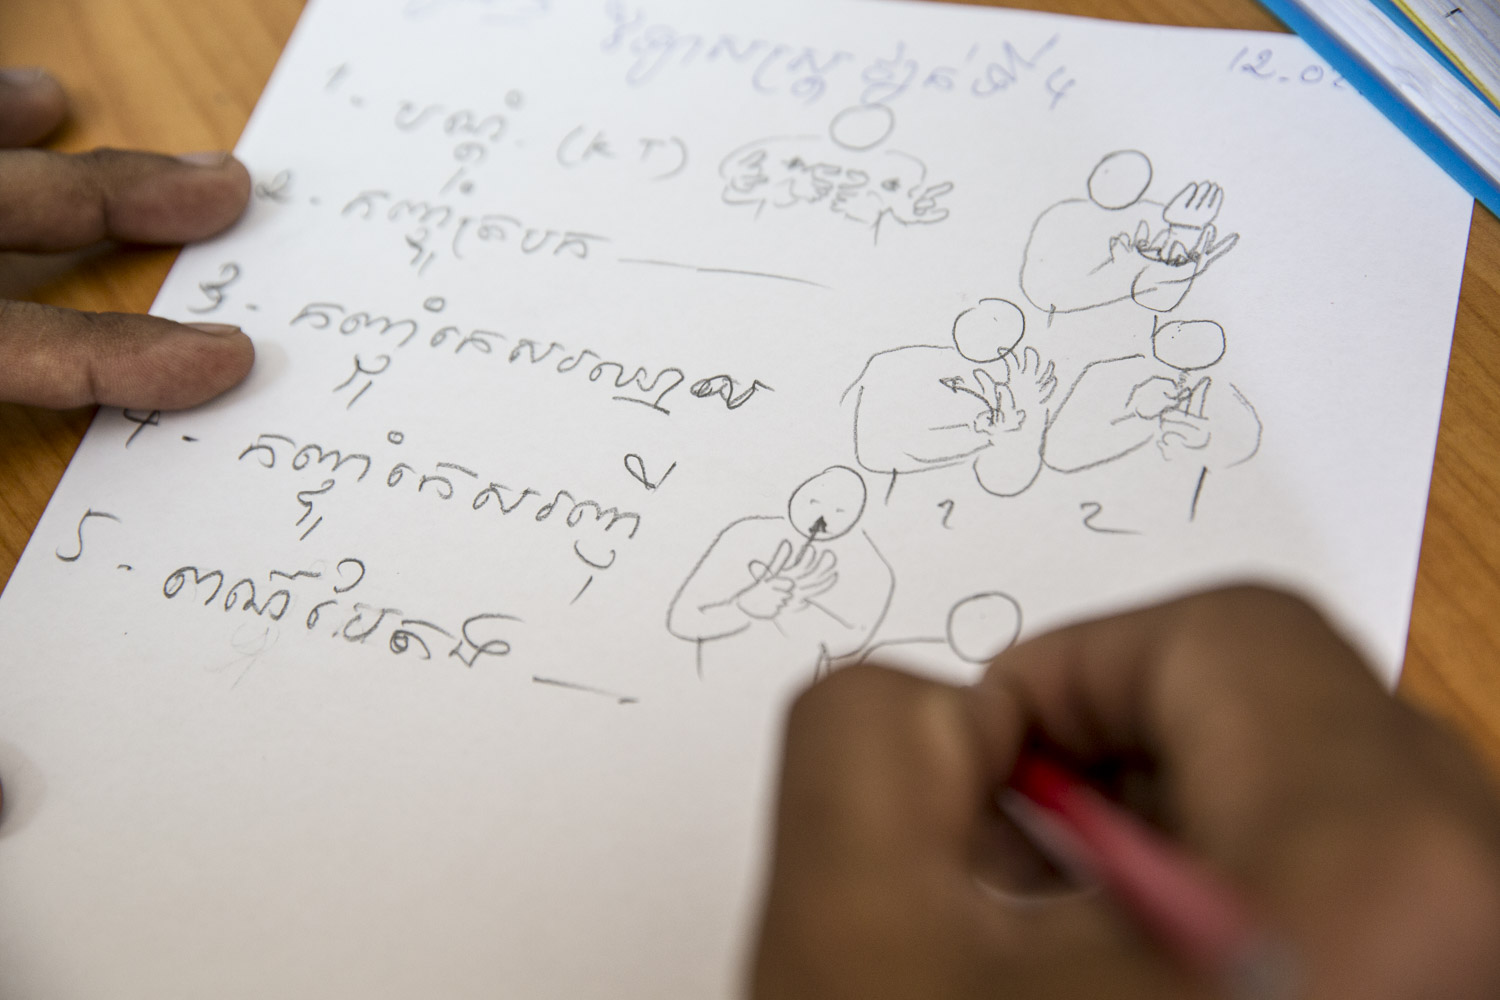  Sam Ath Heang's hands at a language creation session where Cambodian Sign Langauge is being created on a daily basis. Once there is agreement between the participants ,Sam Ath draws the gestures on paper. Later the drawing will be converted to a dig